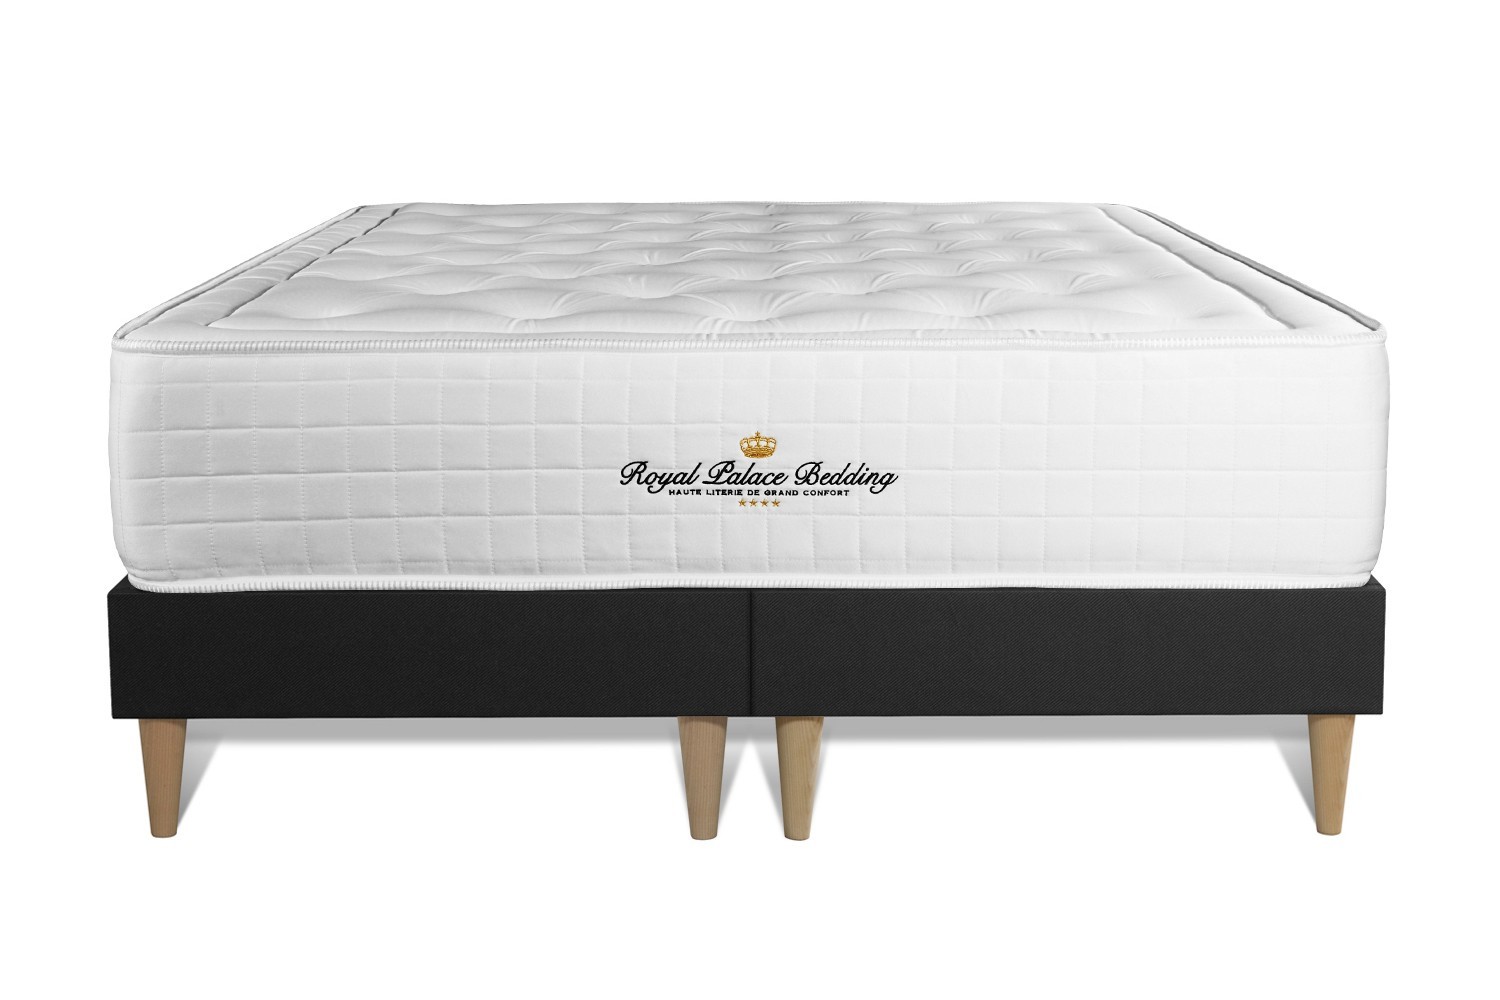 Pack matelas 180x200 double sommiers oreiller couette